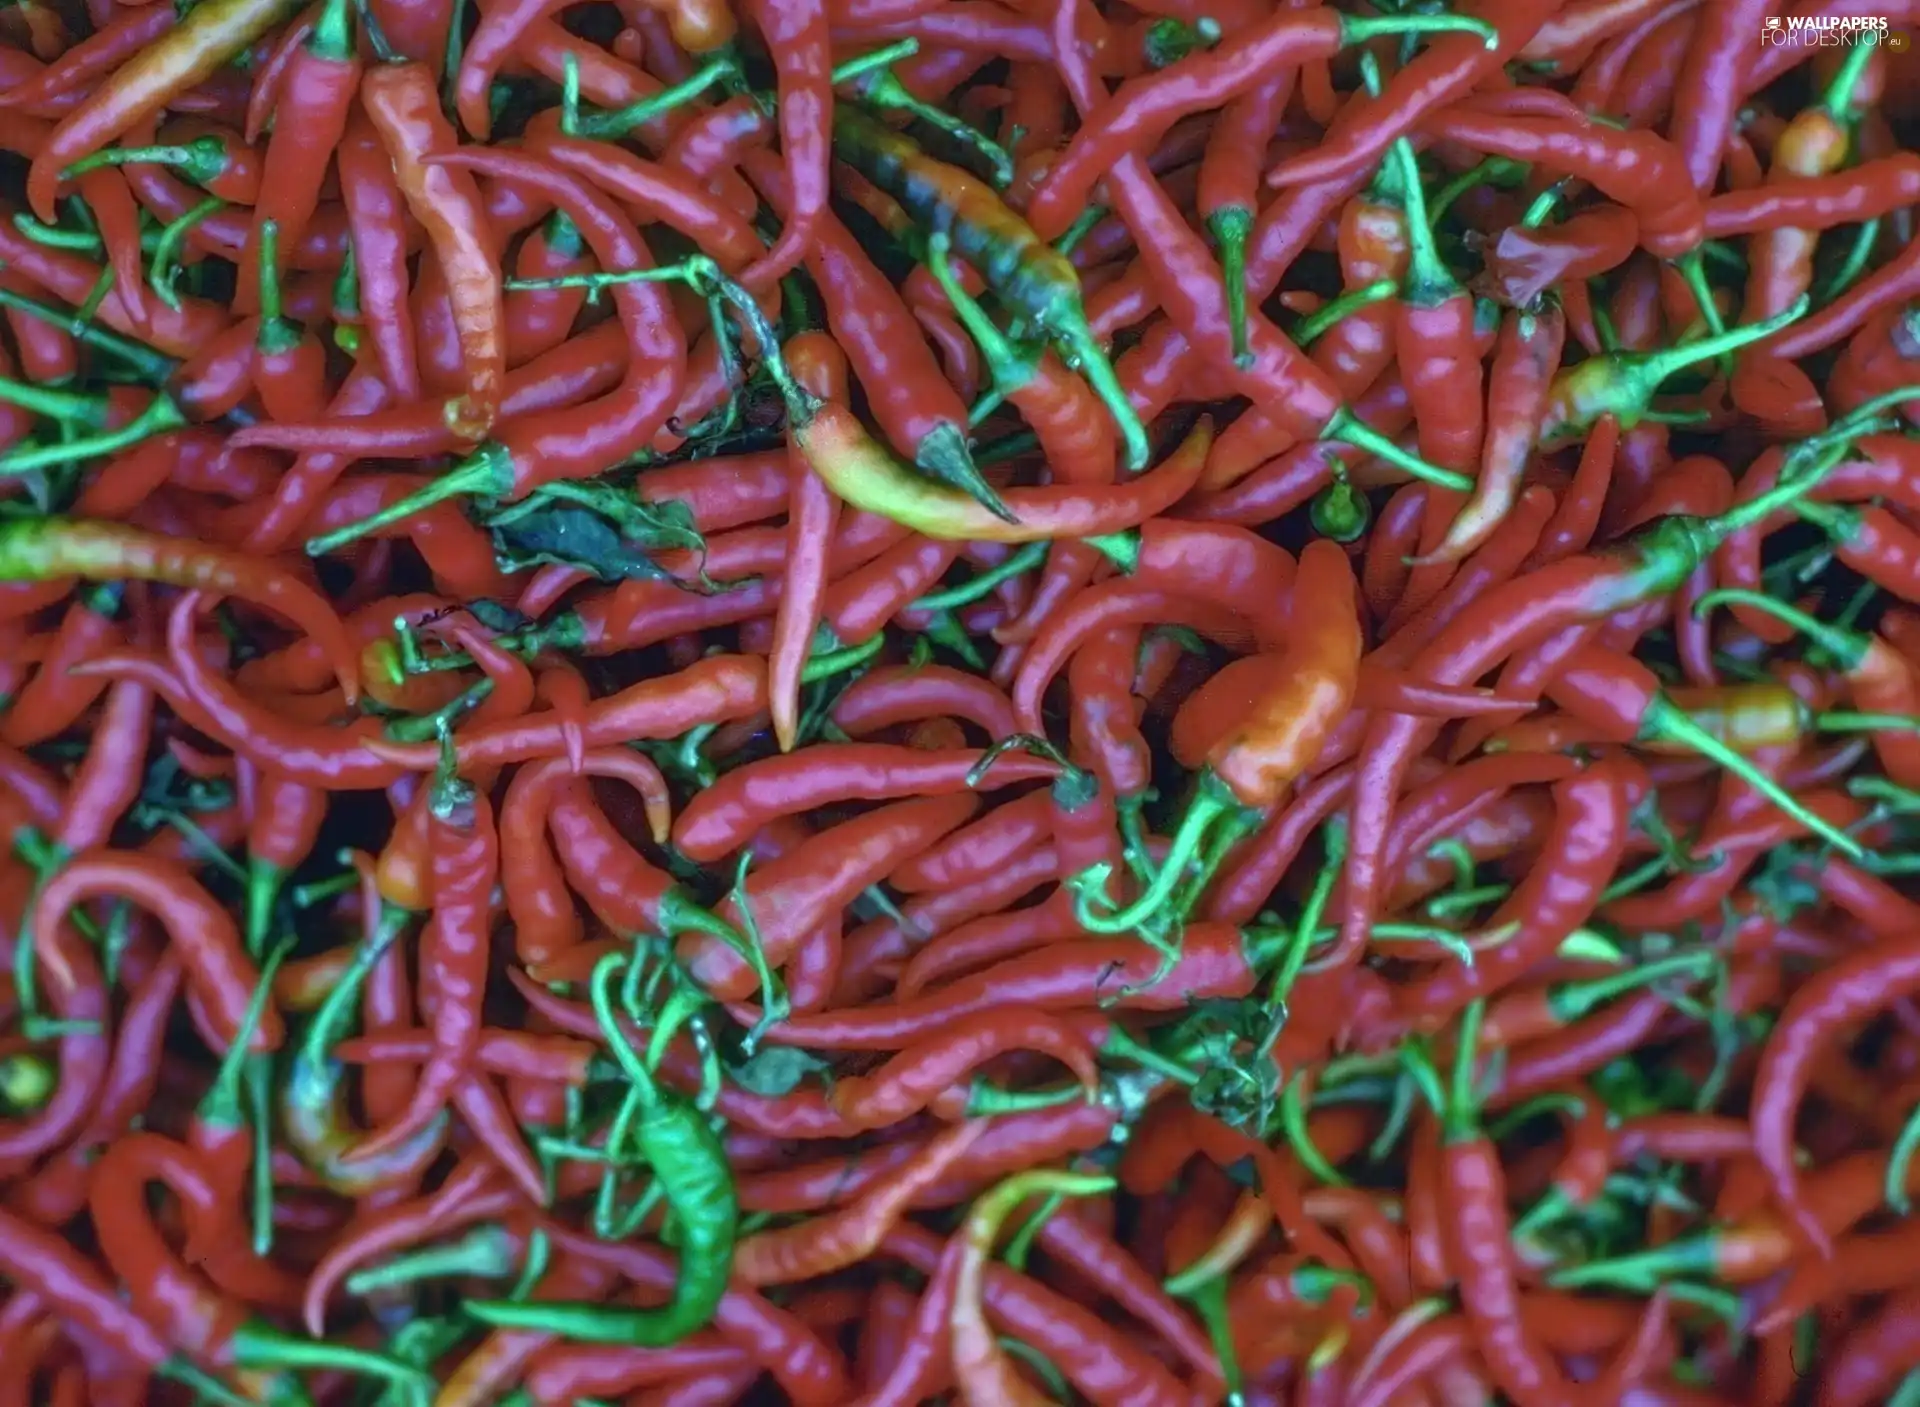 Chili, color, Chilies